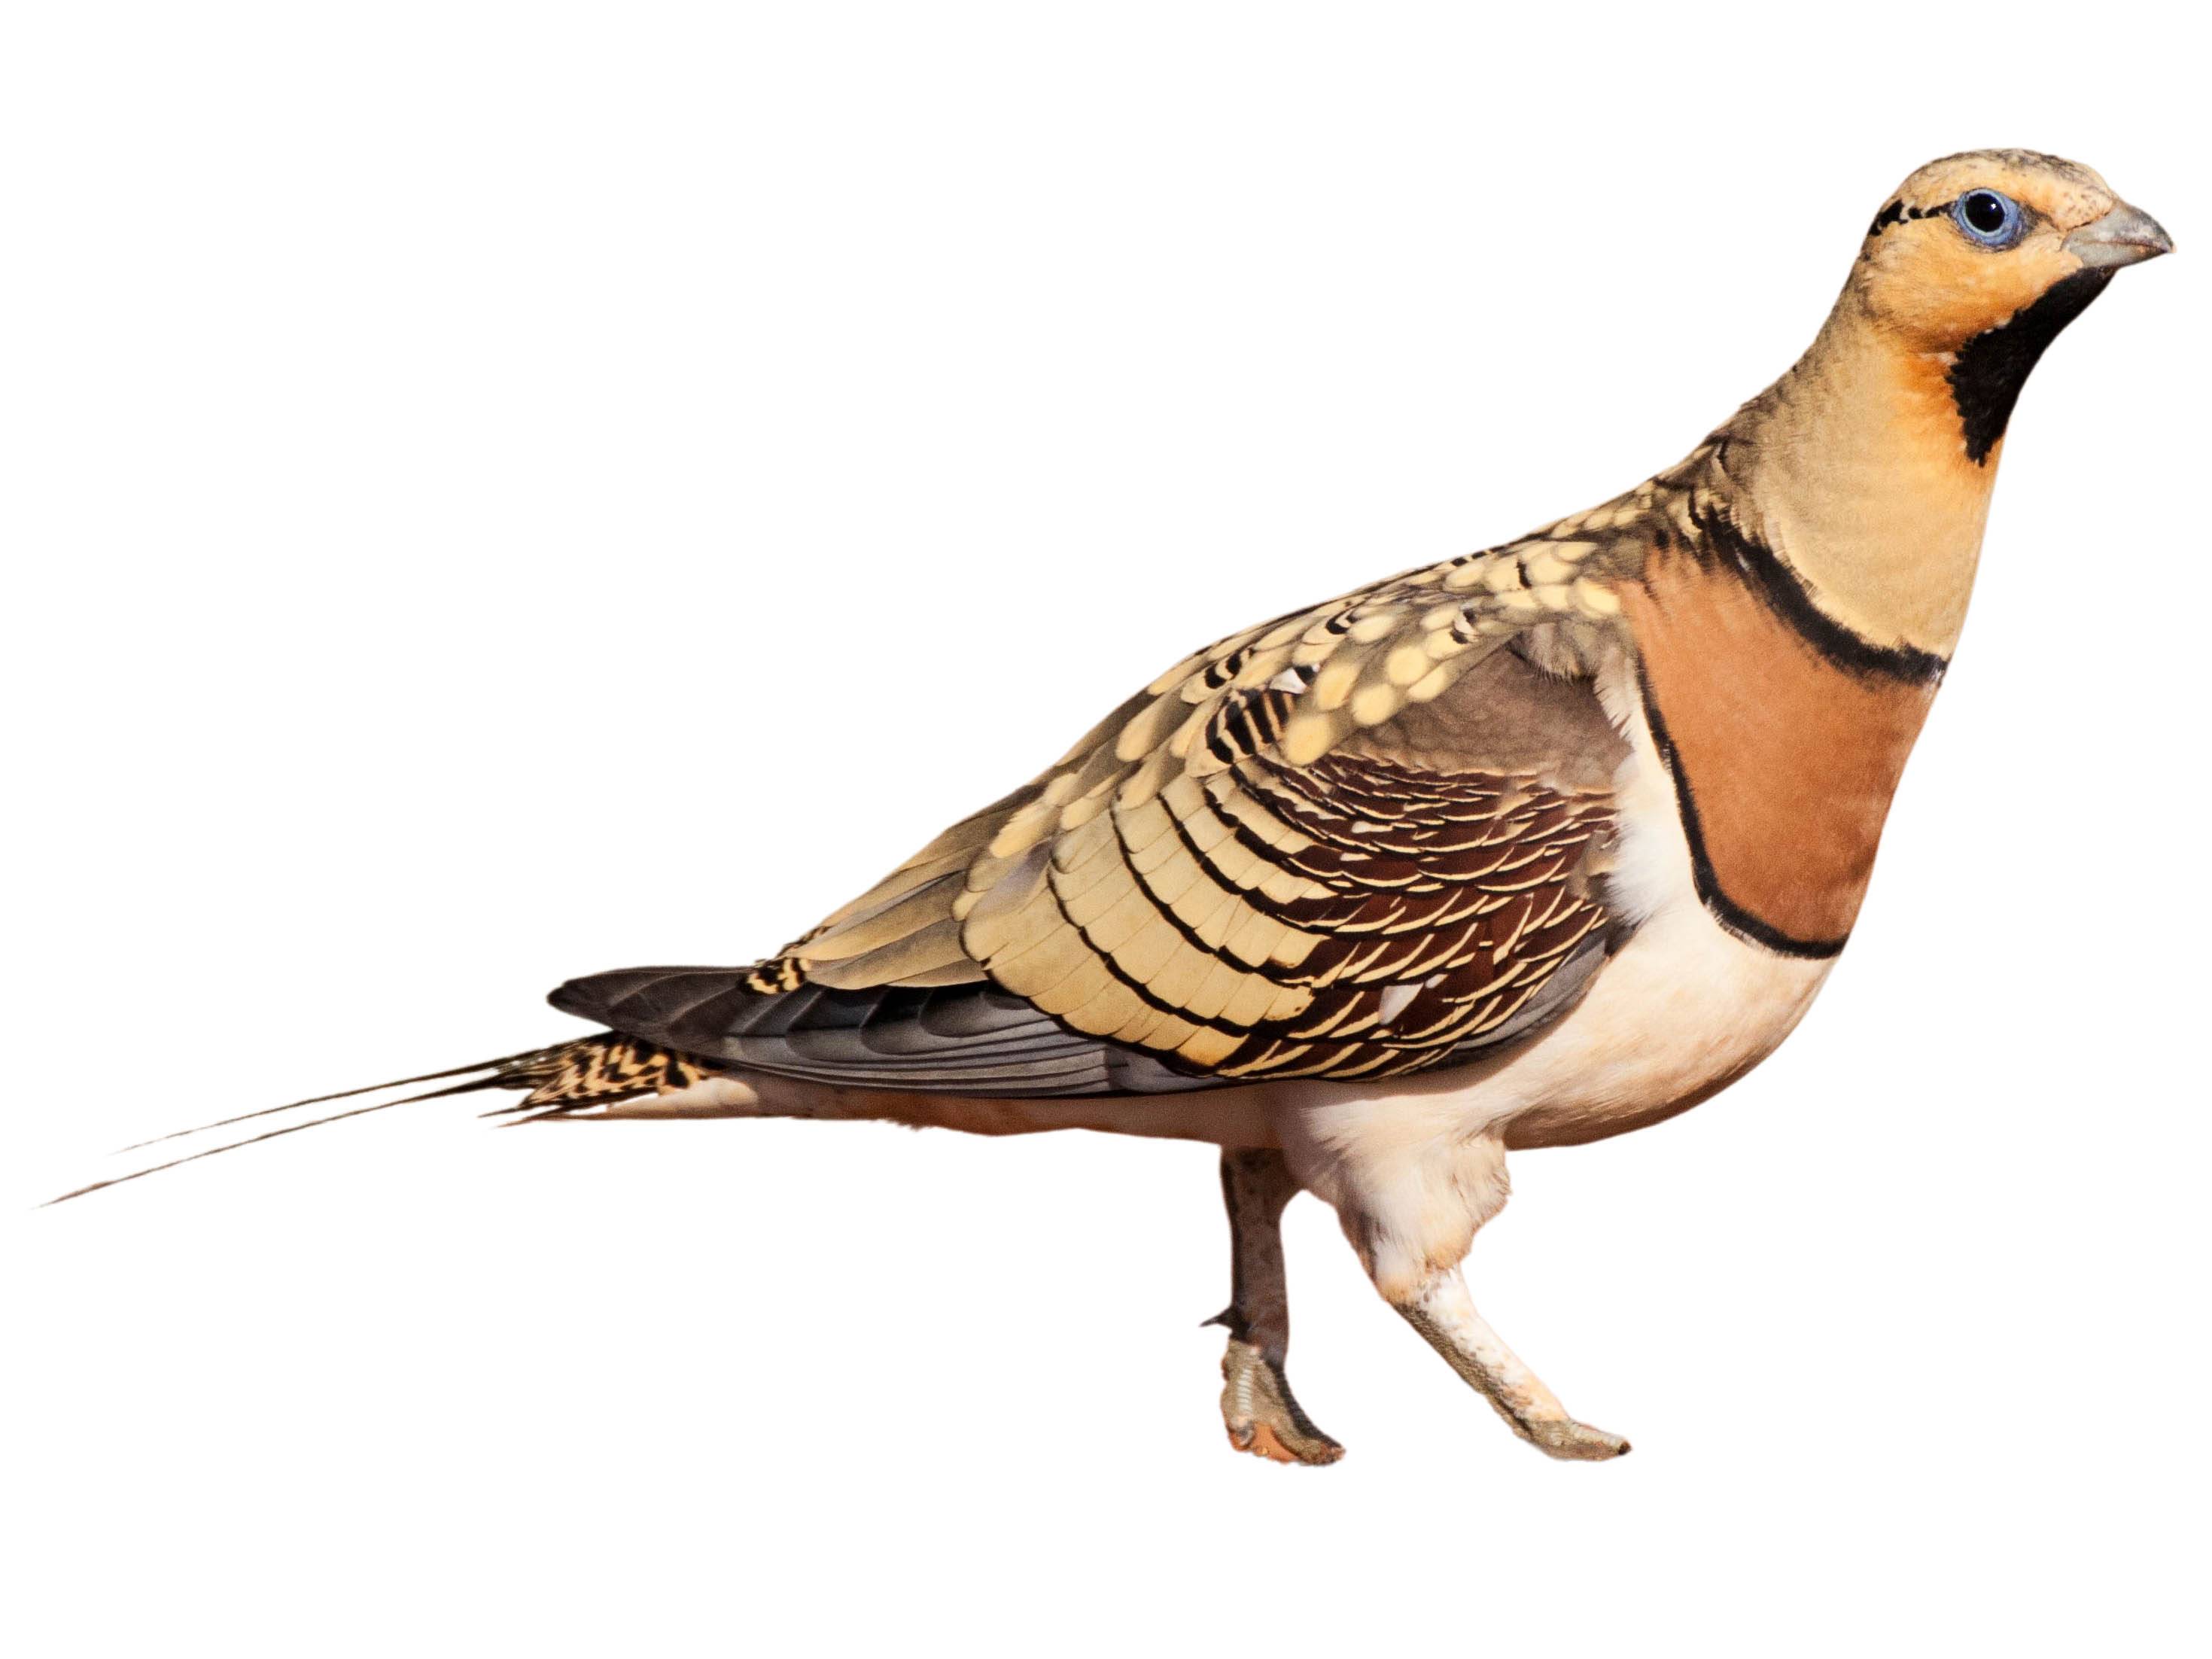 A photo of a Pin-tailed Sandgrouse (Pterocles alchata), male